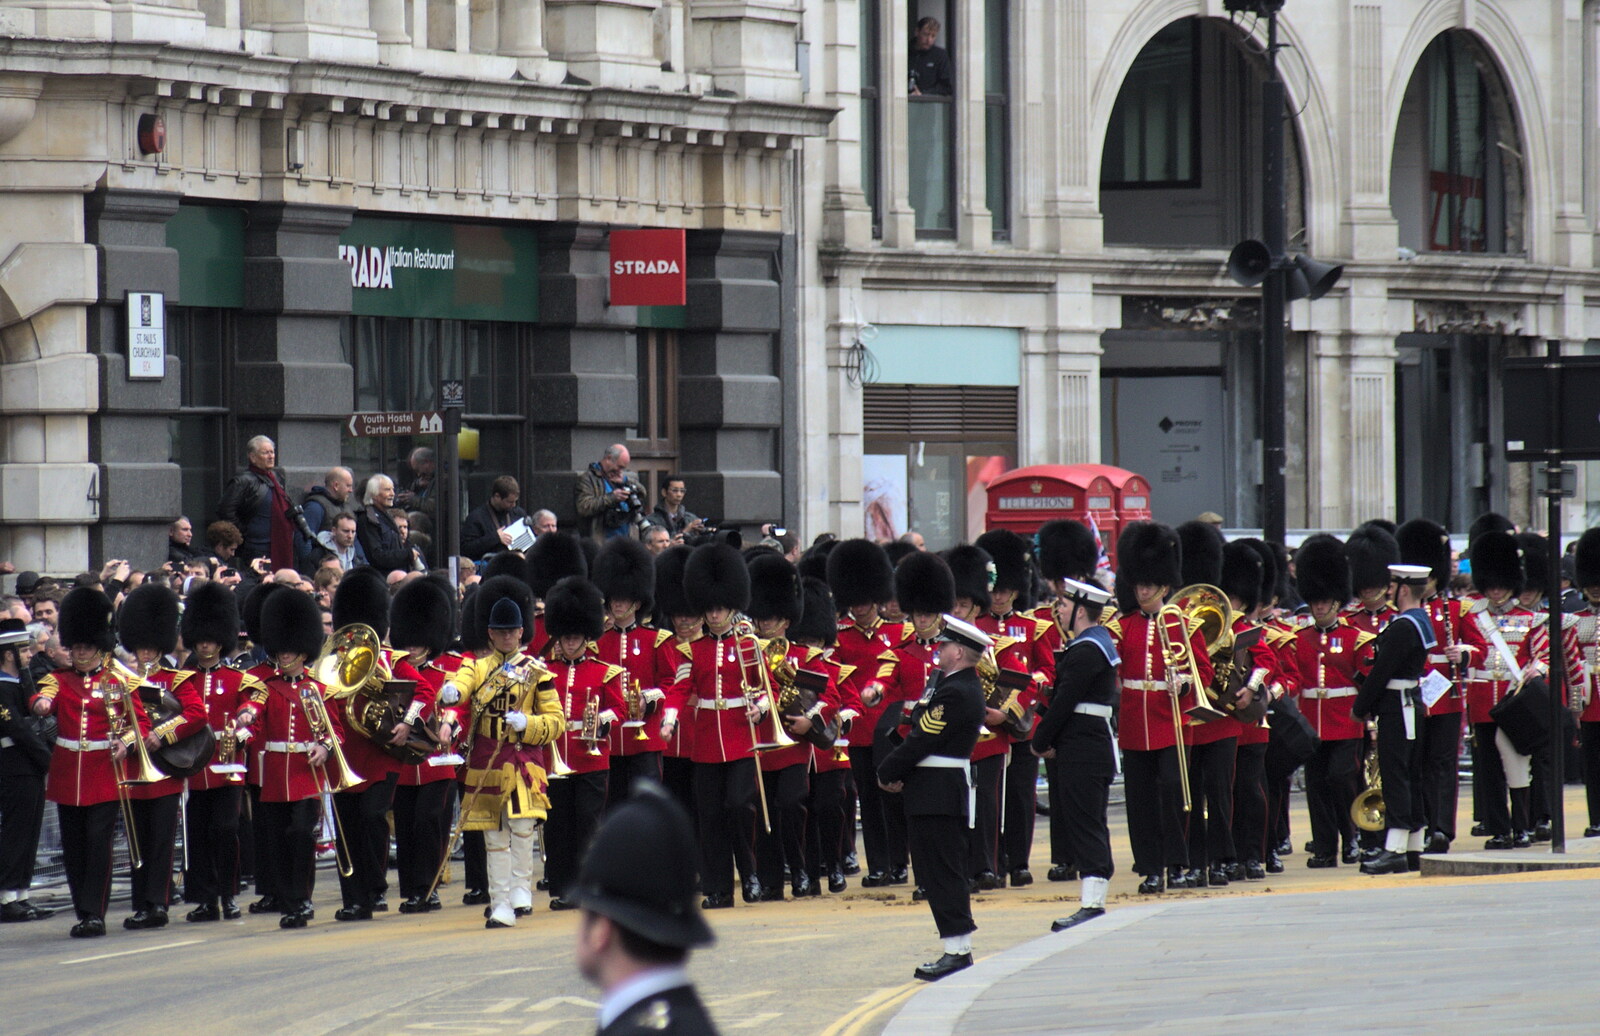 Another military band in Bearskins from Margaret Thatcher's Funeral, St. Paul's, London - 17th April 2013